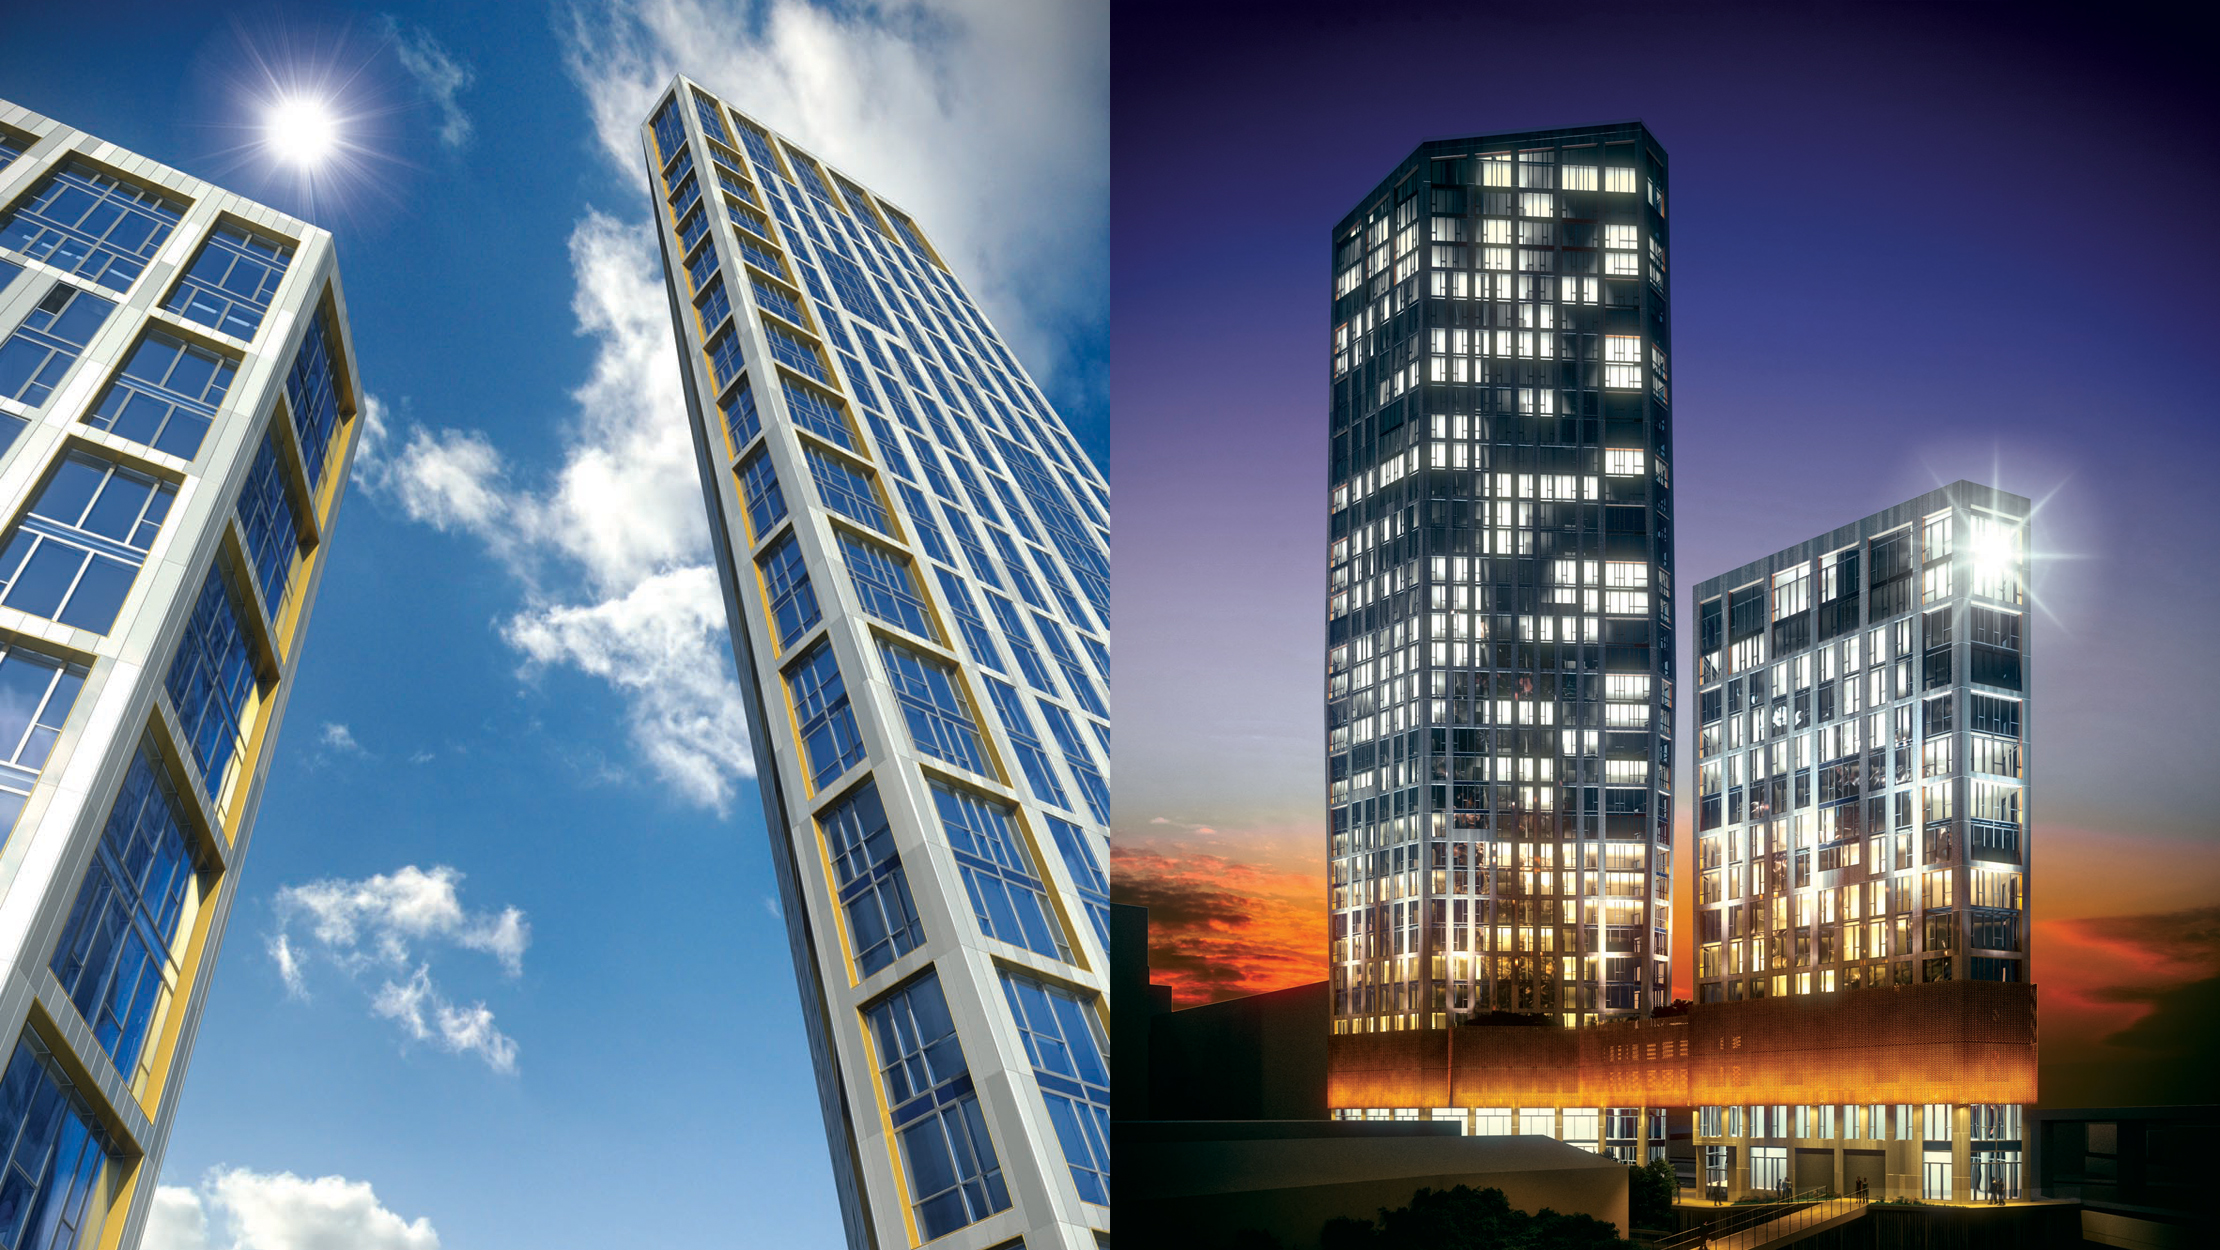 Introducing Capital Towers in Stratford